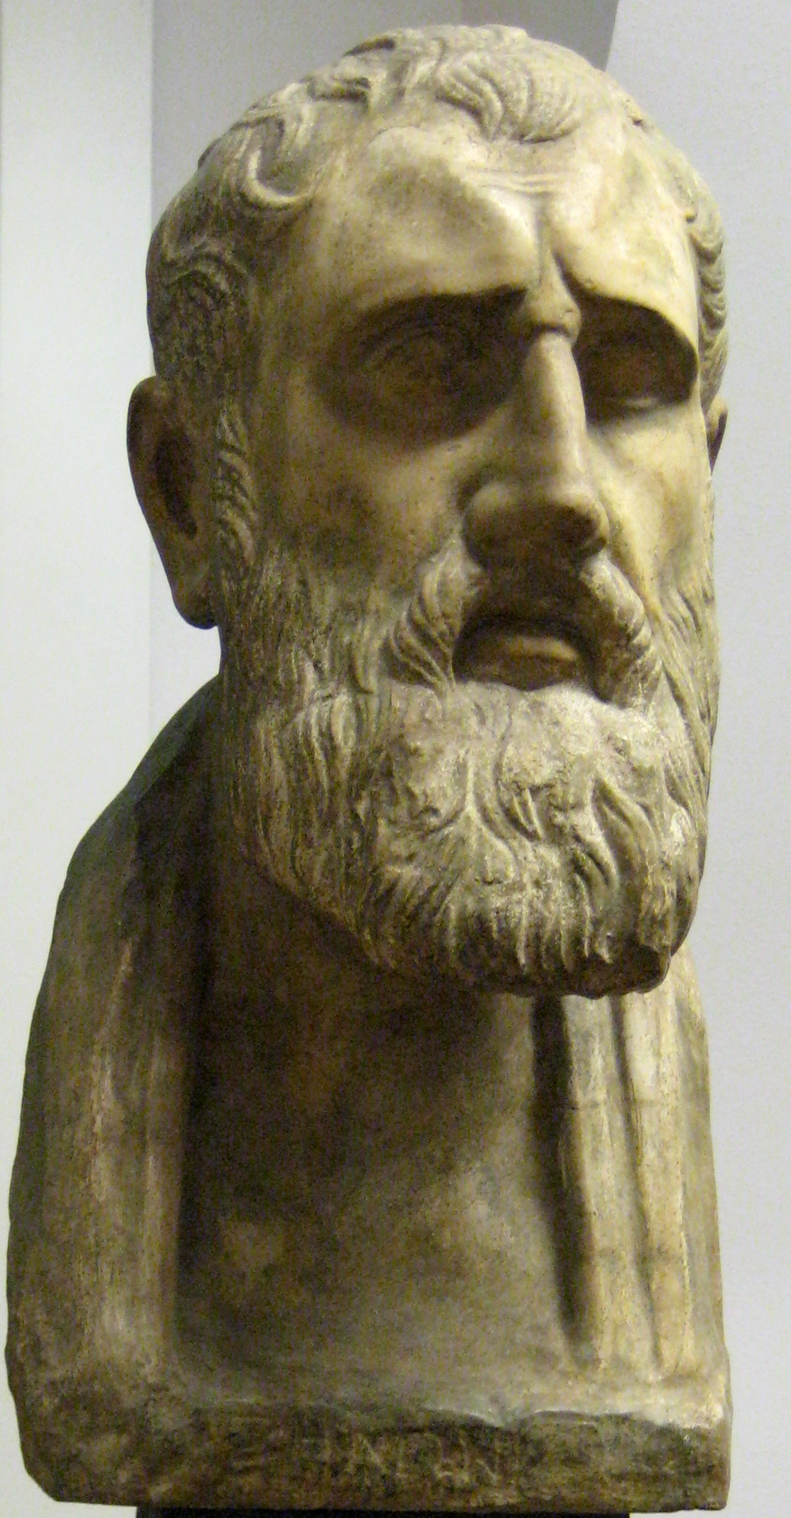 Zeno of Elea  490 BC to ca. 430 BC was a pre-Socratic Greek philosopher of southern Italy and a member of the Eleatic School founded by Parmenides. Aristotle called him the inventor of the dialectic